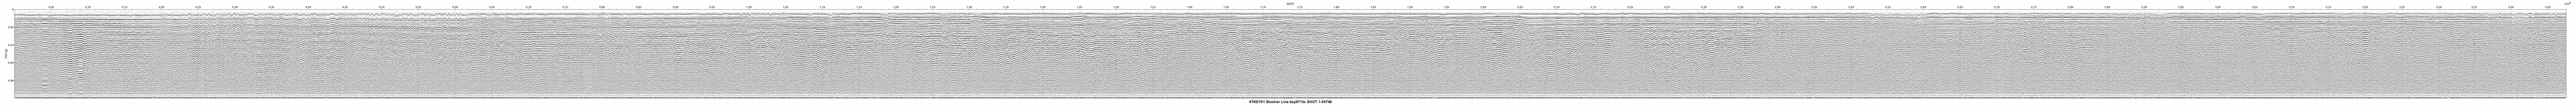 Thumbnail GIF image of the seismic trackline key9715c, with a hotlink to the more detailed, larger JPG image.